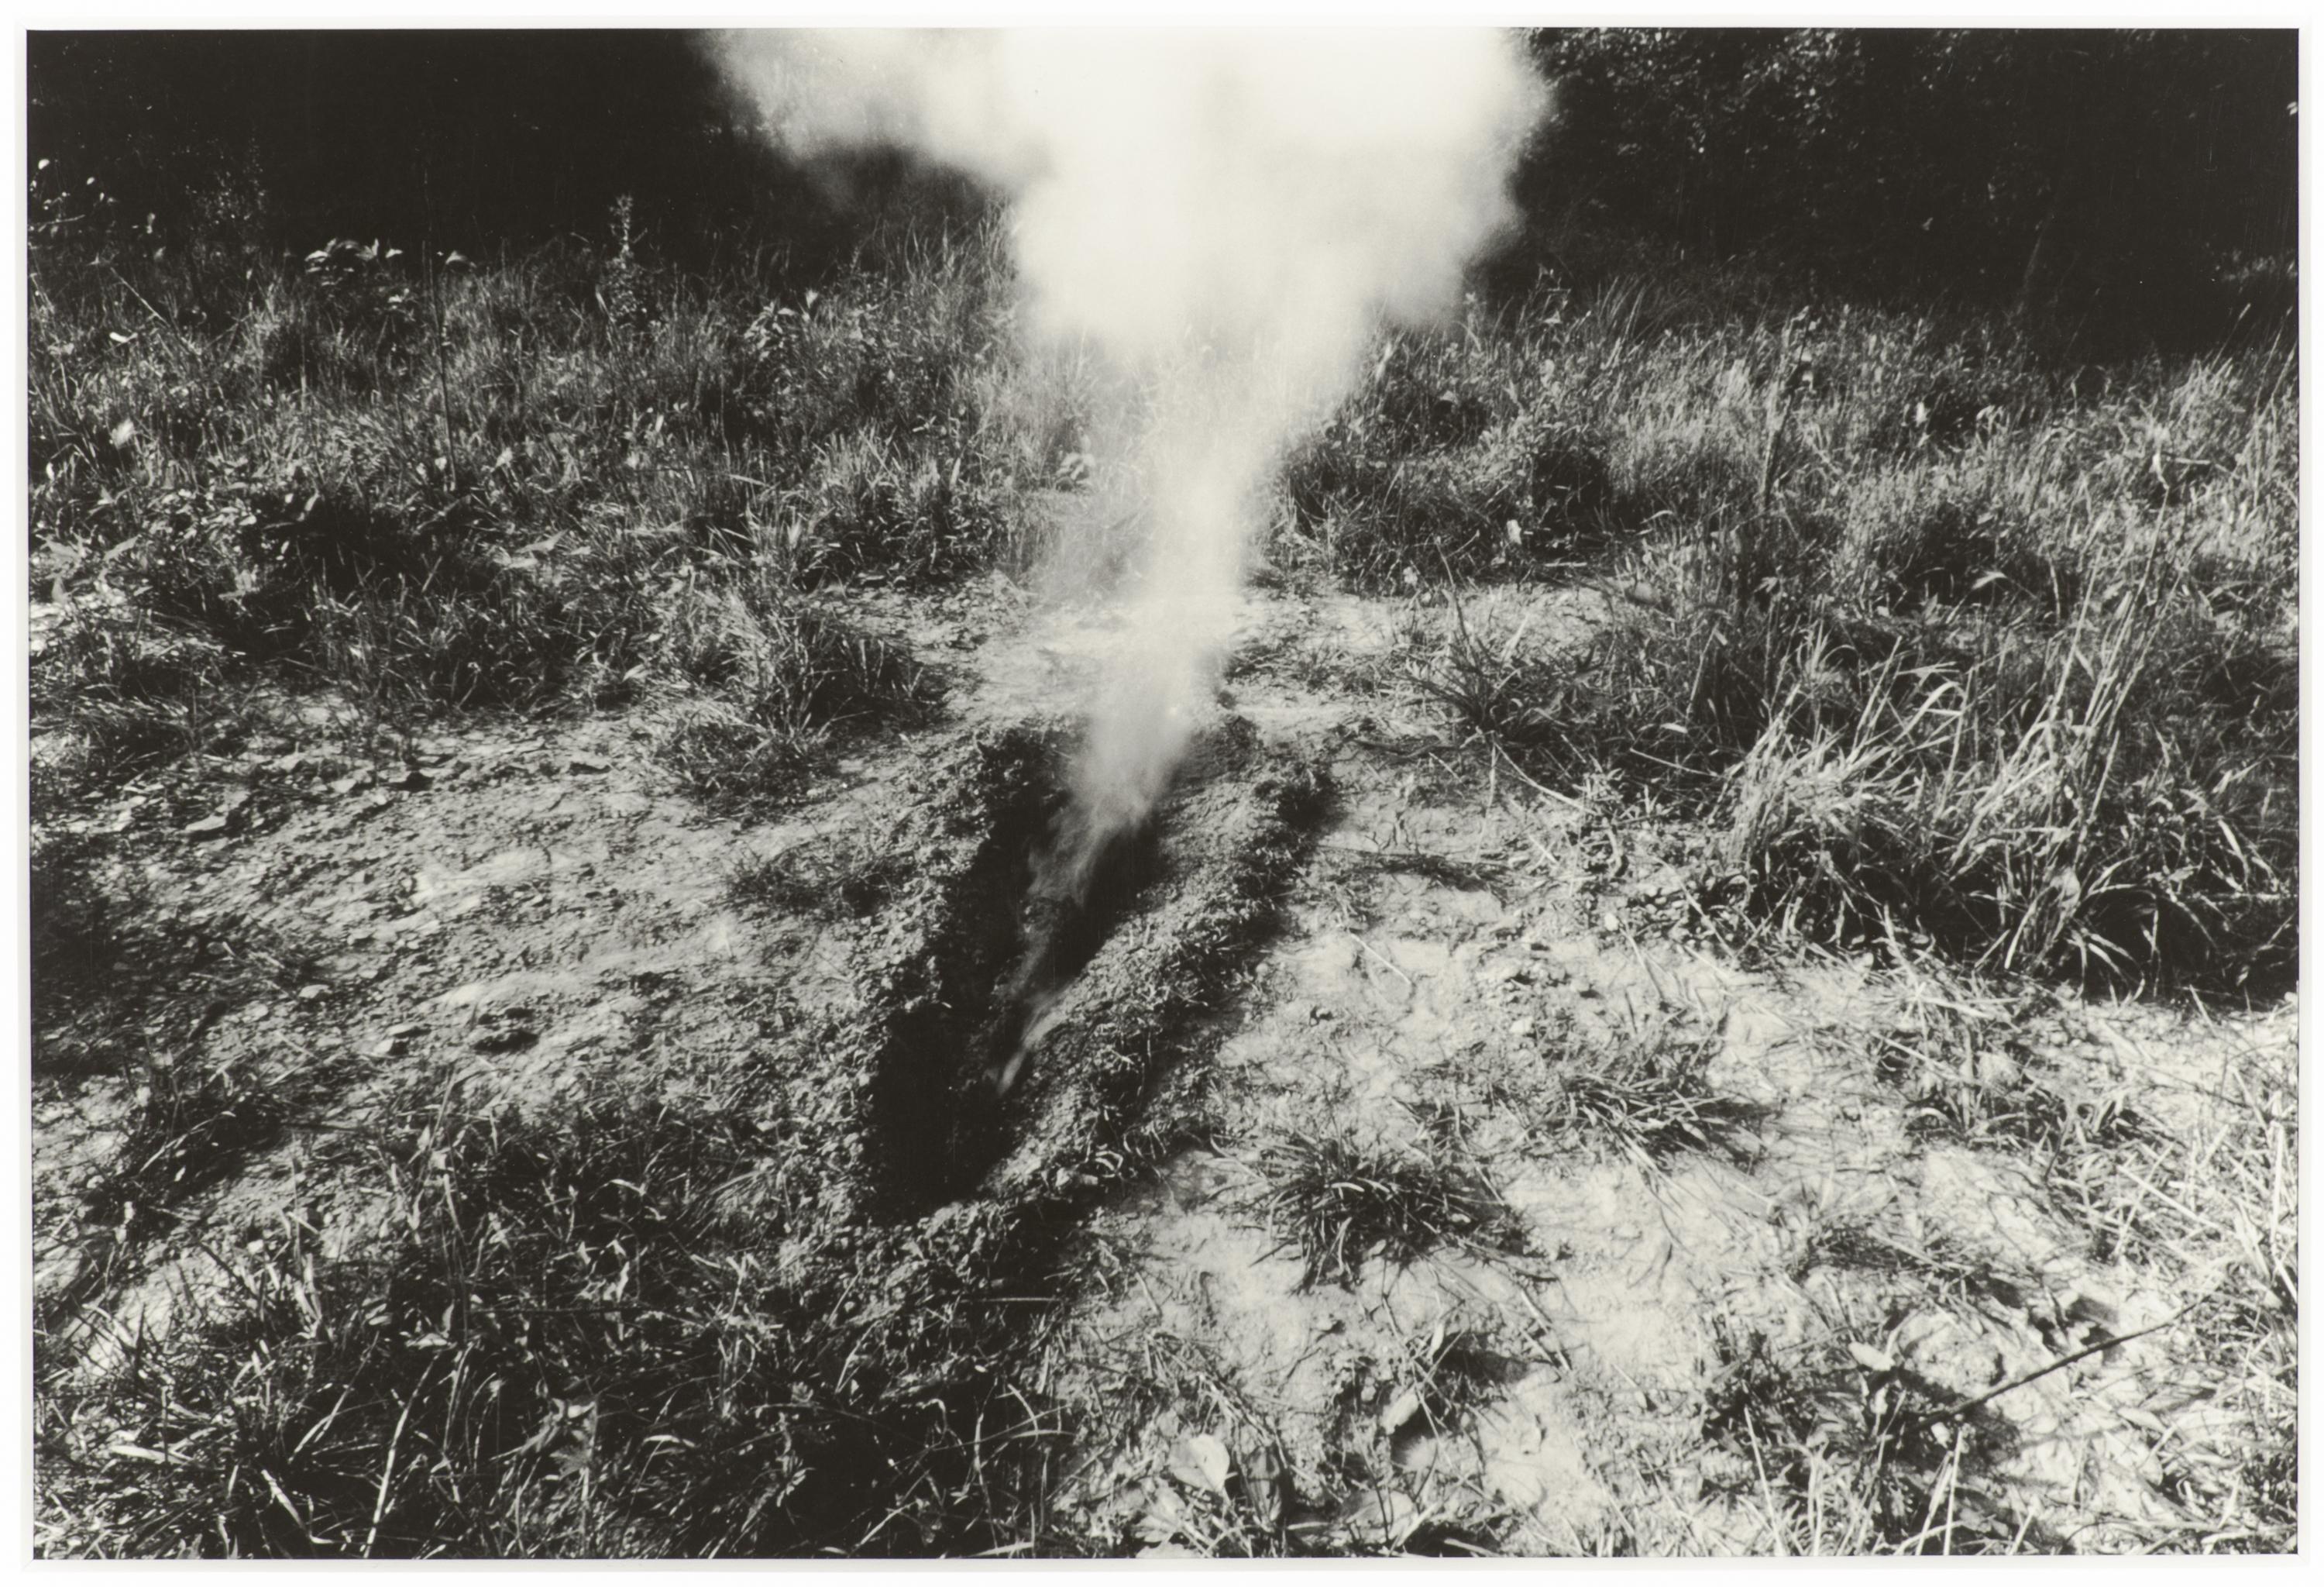 A black-and-white photograph depicts smoke billowing from a body-sized trench in a clearing with weeds and trees on the horizon.